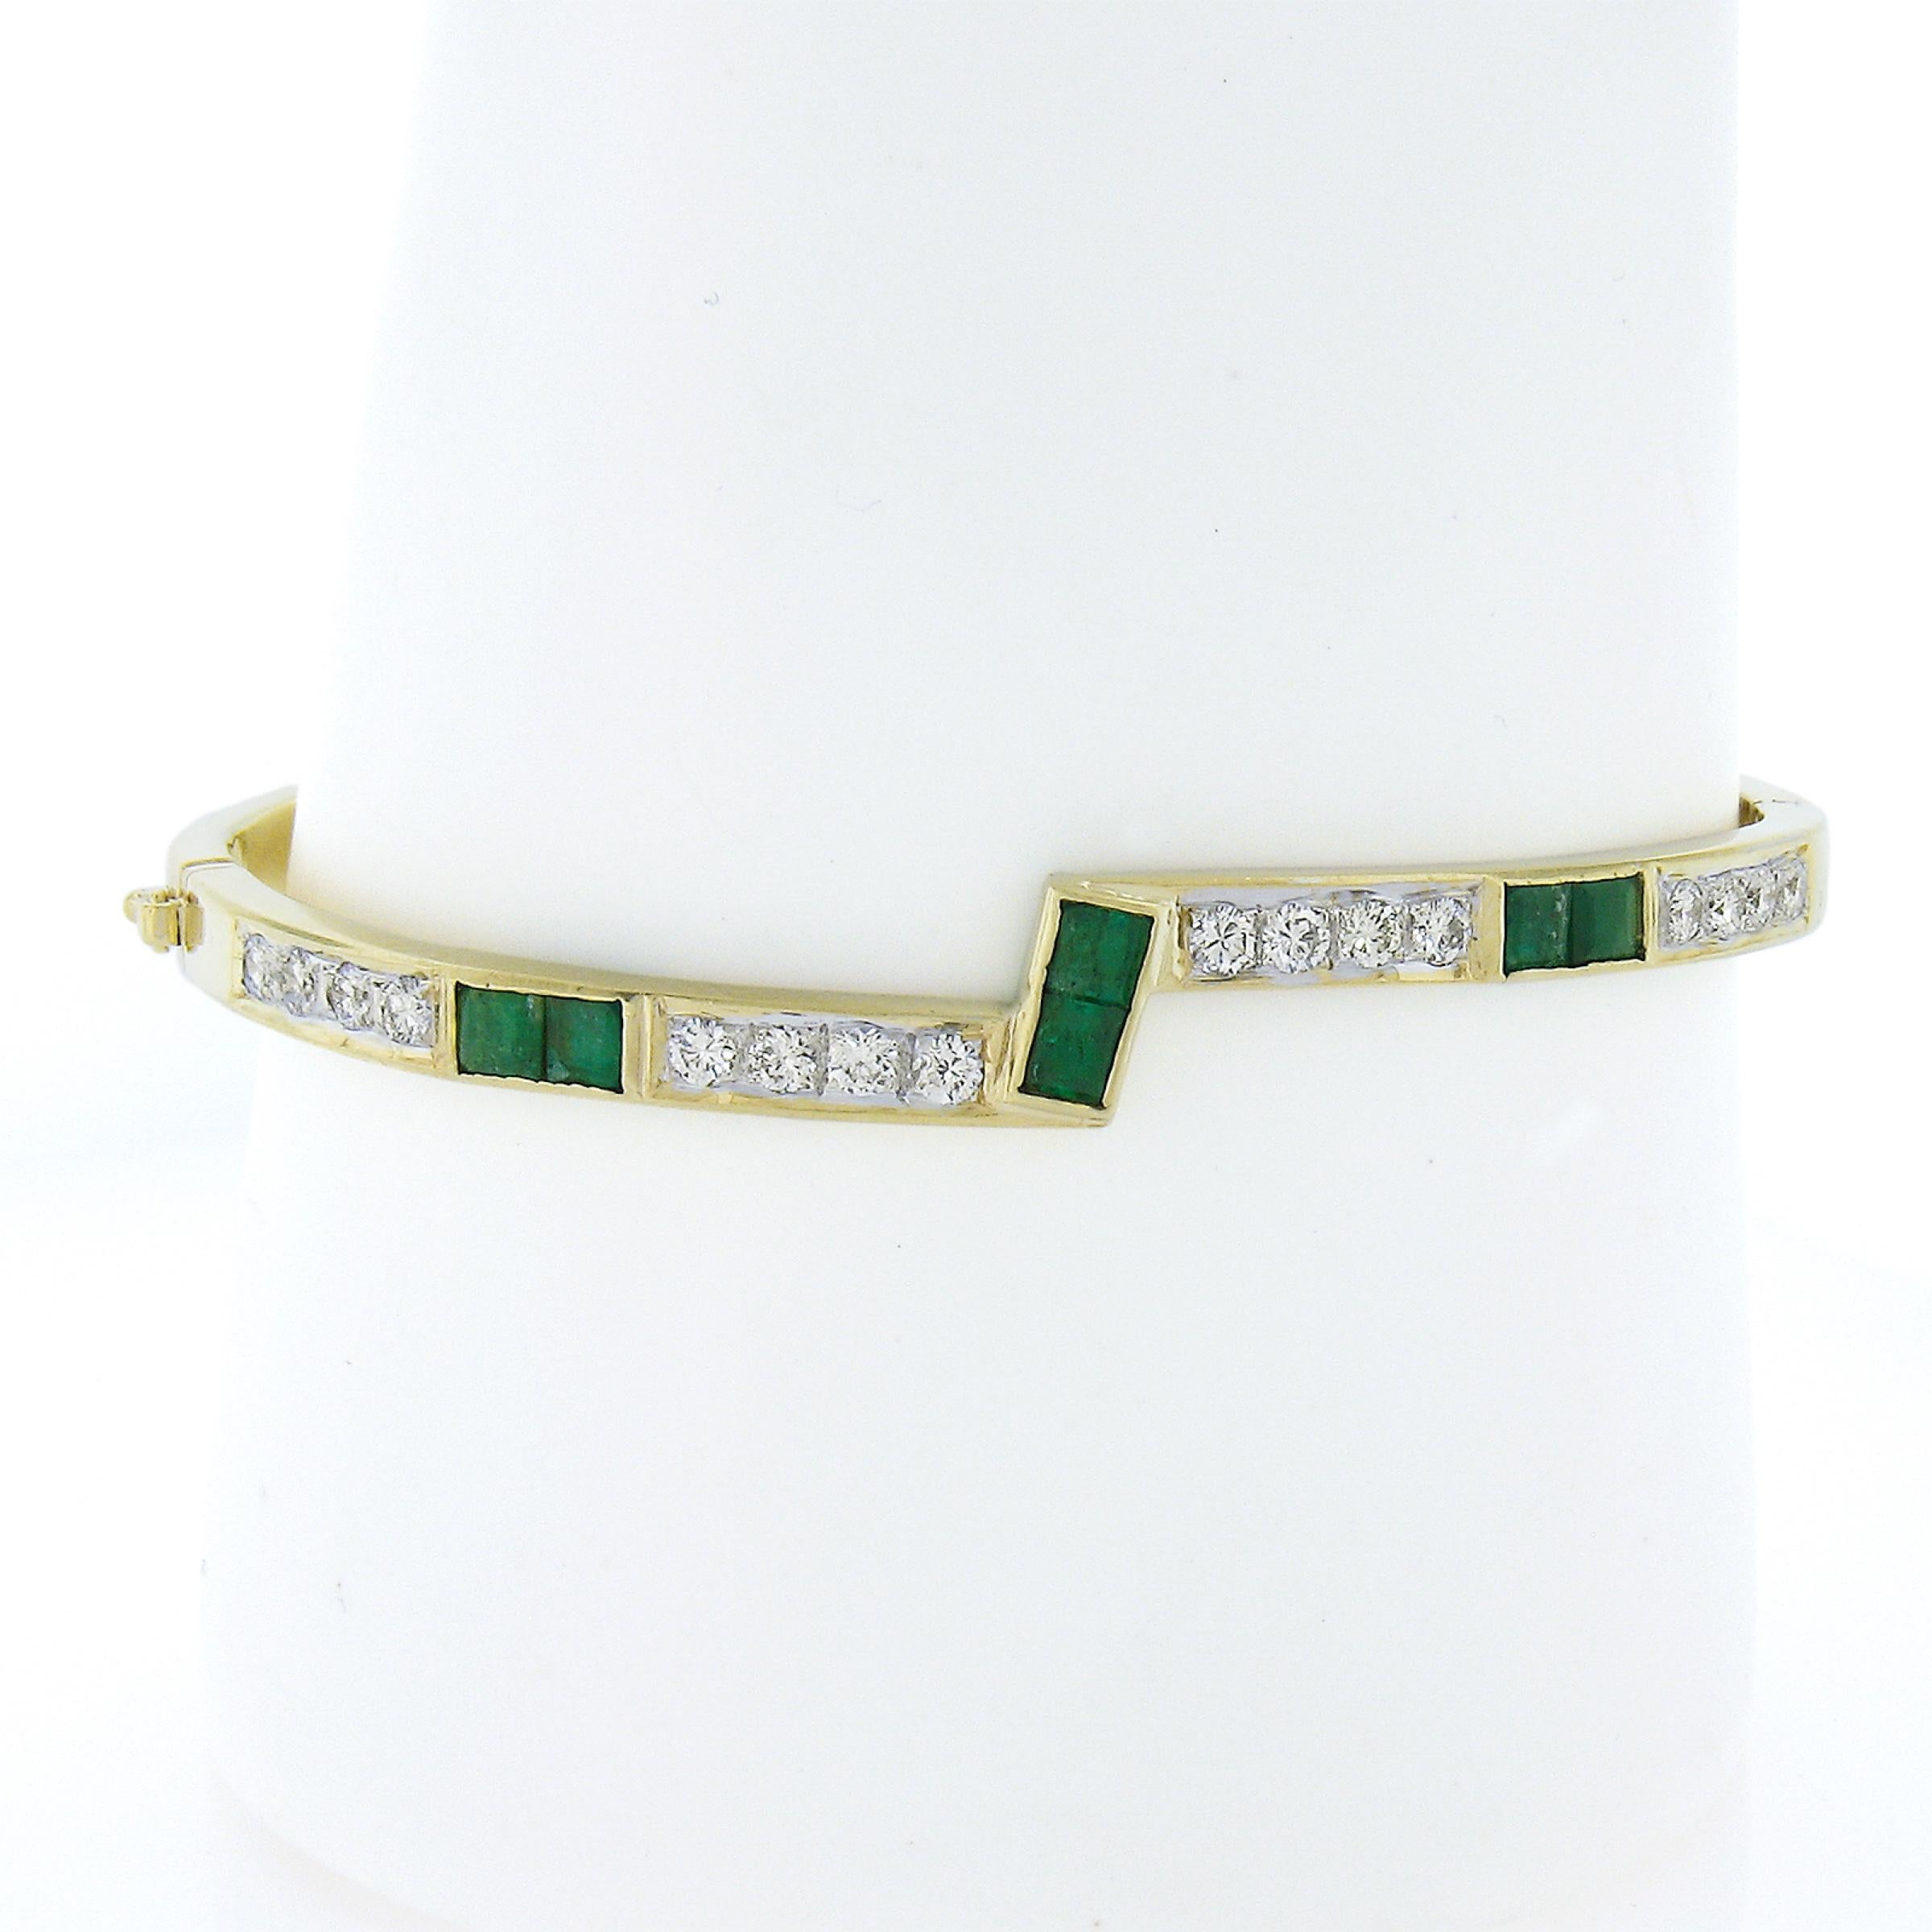 Up for sale is this stylish and perfectly stackable bangle bracelet that is crafted in solid 18k yellow gold. It features round brilliant cut diamonds that are accented with square step cut natural emeralds throughout. These fiery diamonds and rich